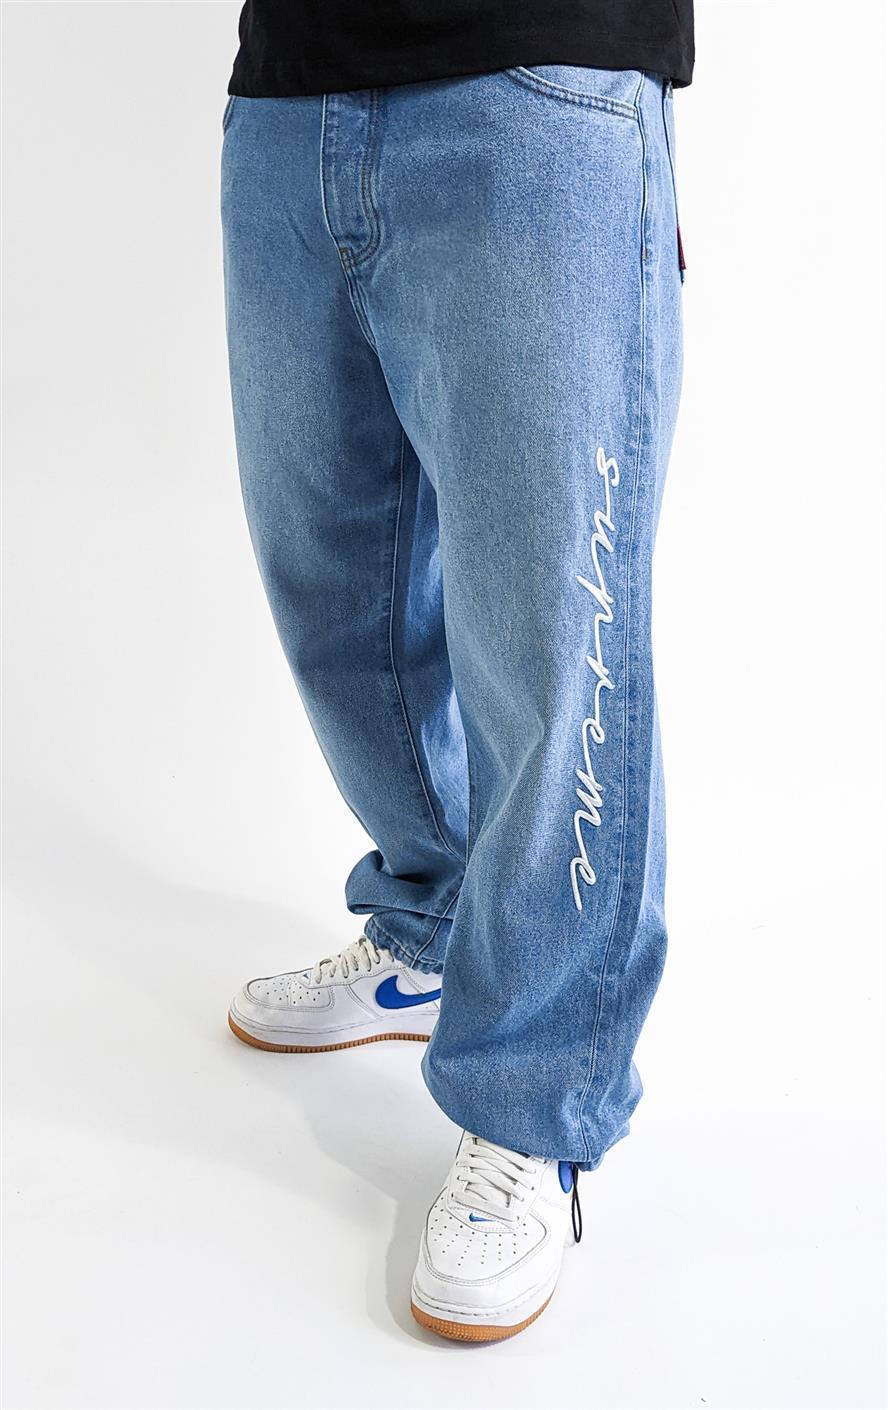 dada supreme baggy fit jeans - 1